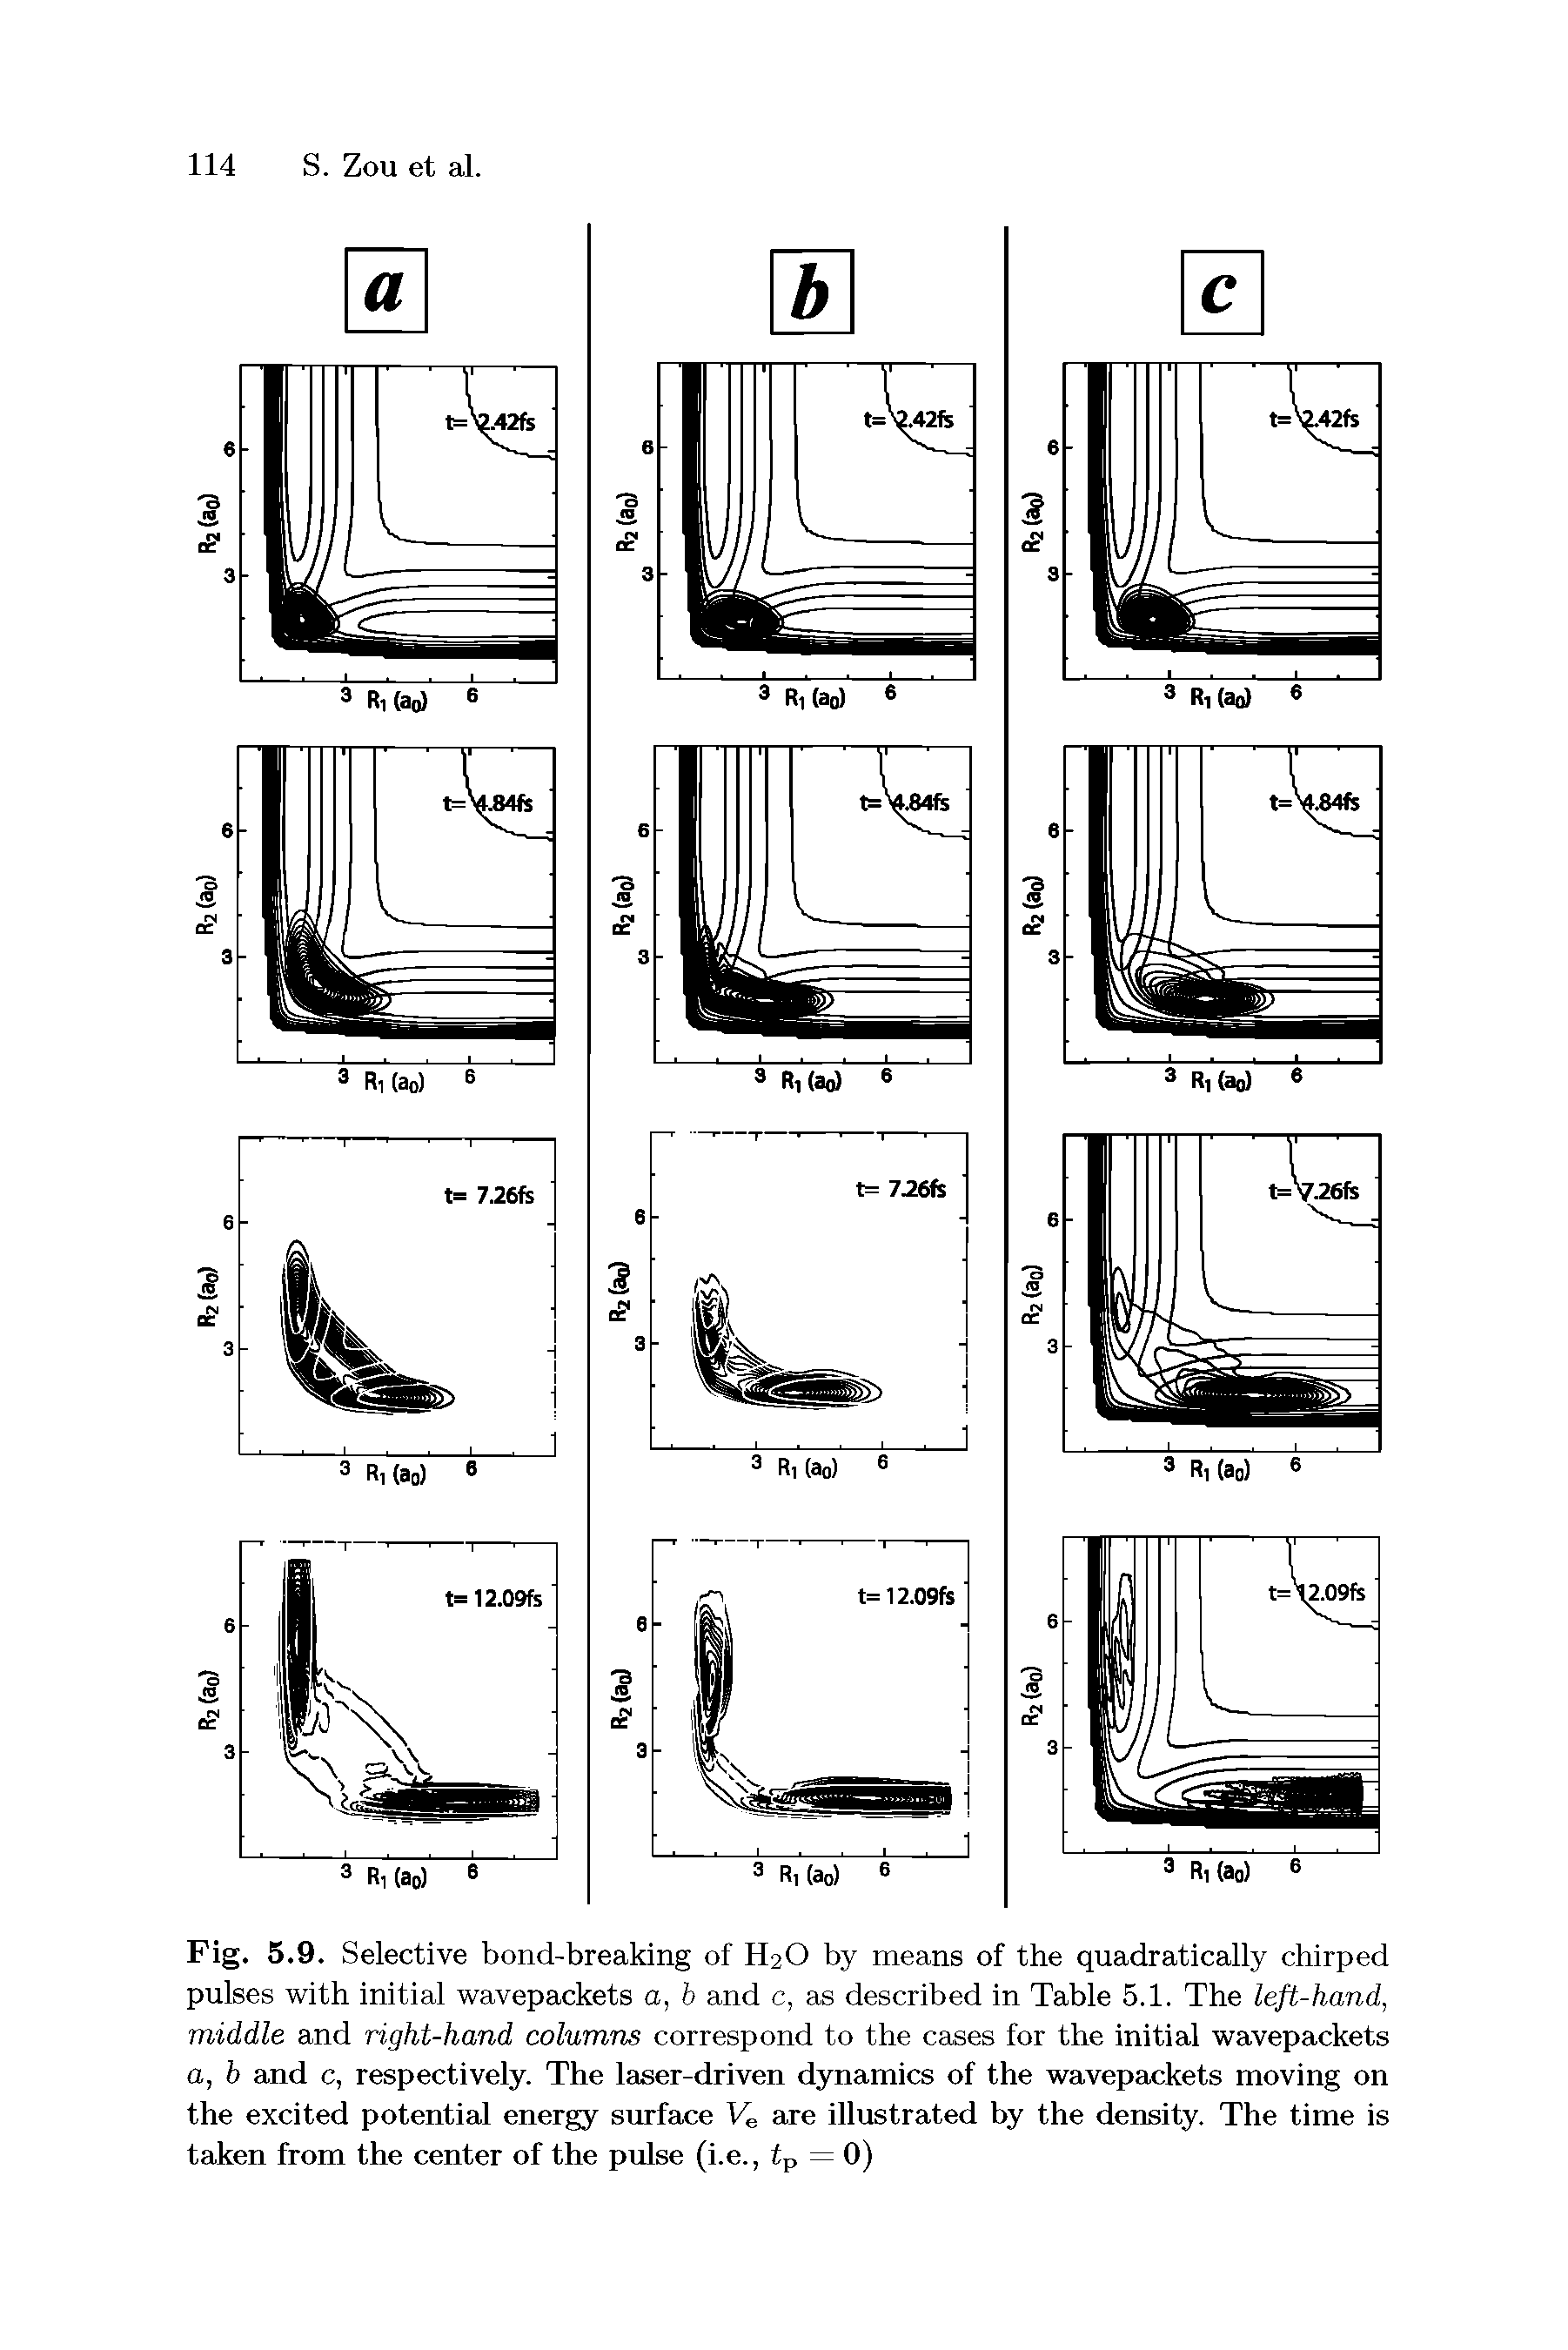 Fig. 5.9. Selective bond-breaking of H2O by means of the quadratically chirped pulses with initial wavepackets a, b and c, as described in Table 5.1. The left-hand, middle and right-hand columns correspond to the cases for the initial wavepackets a, b and c, respectively. The laser-driven dynamics of the wavepackets moving on the excited potential energy surface Ve are illustrated by the density. The time is taken from the center of the pulse (i.e., tp = 0)...